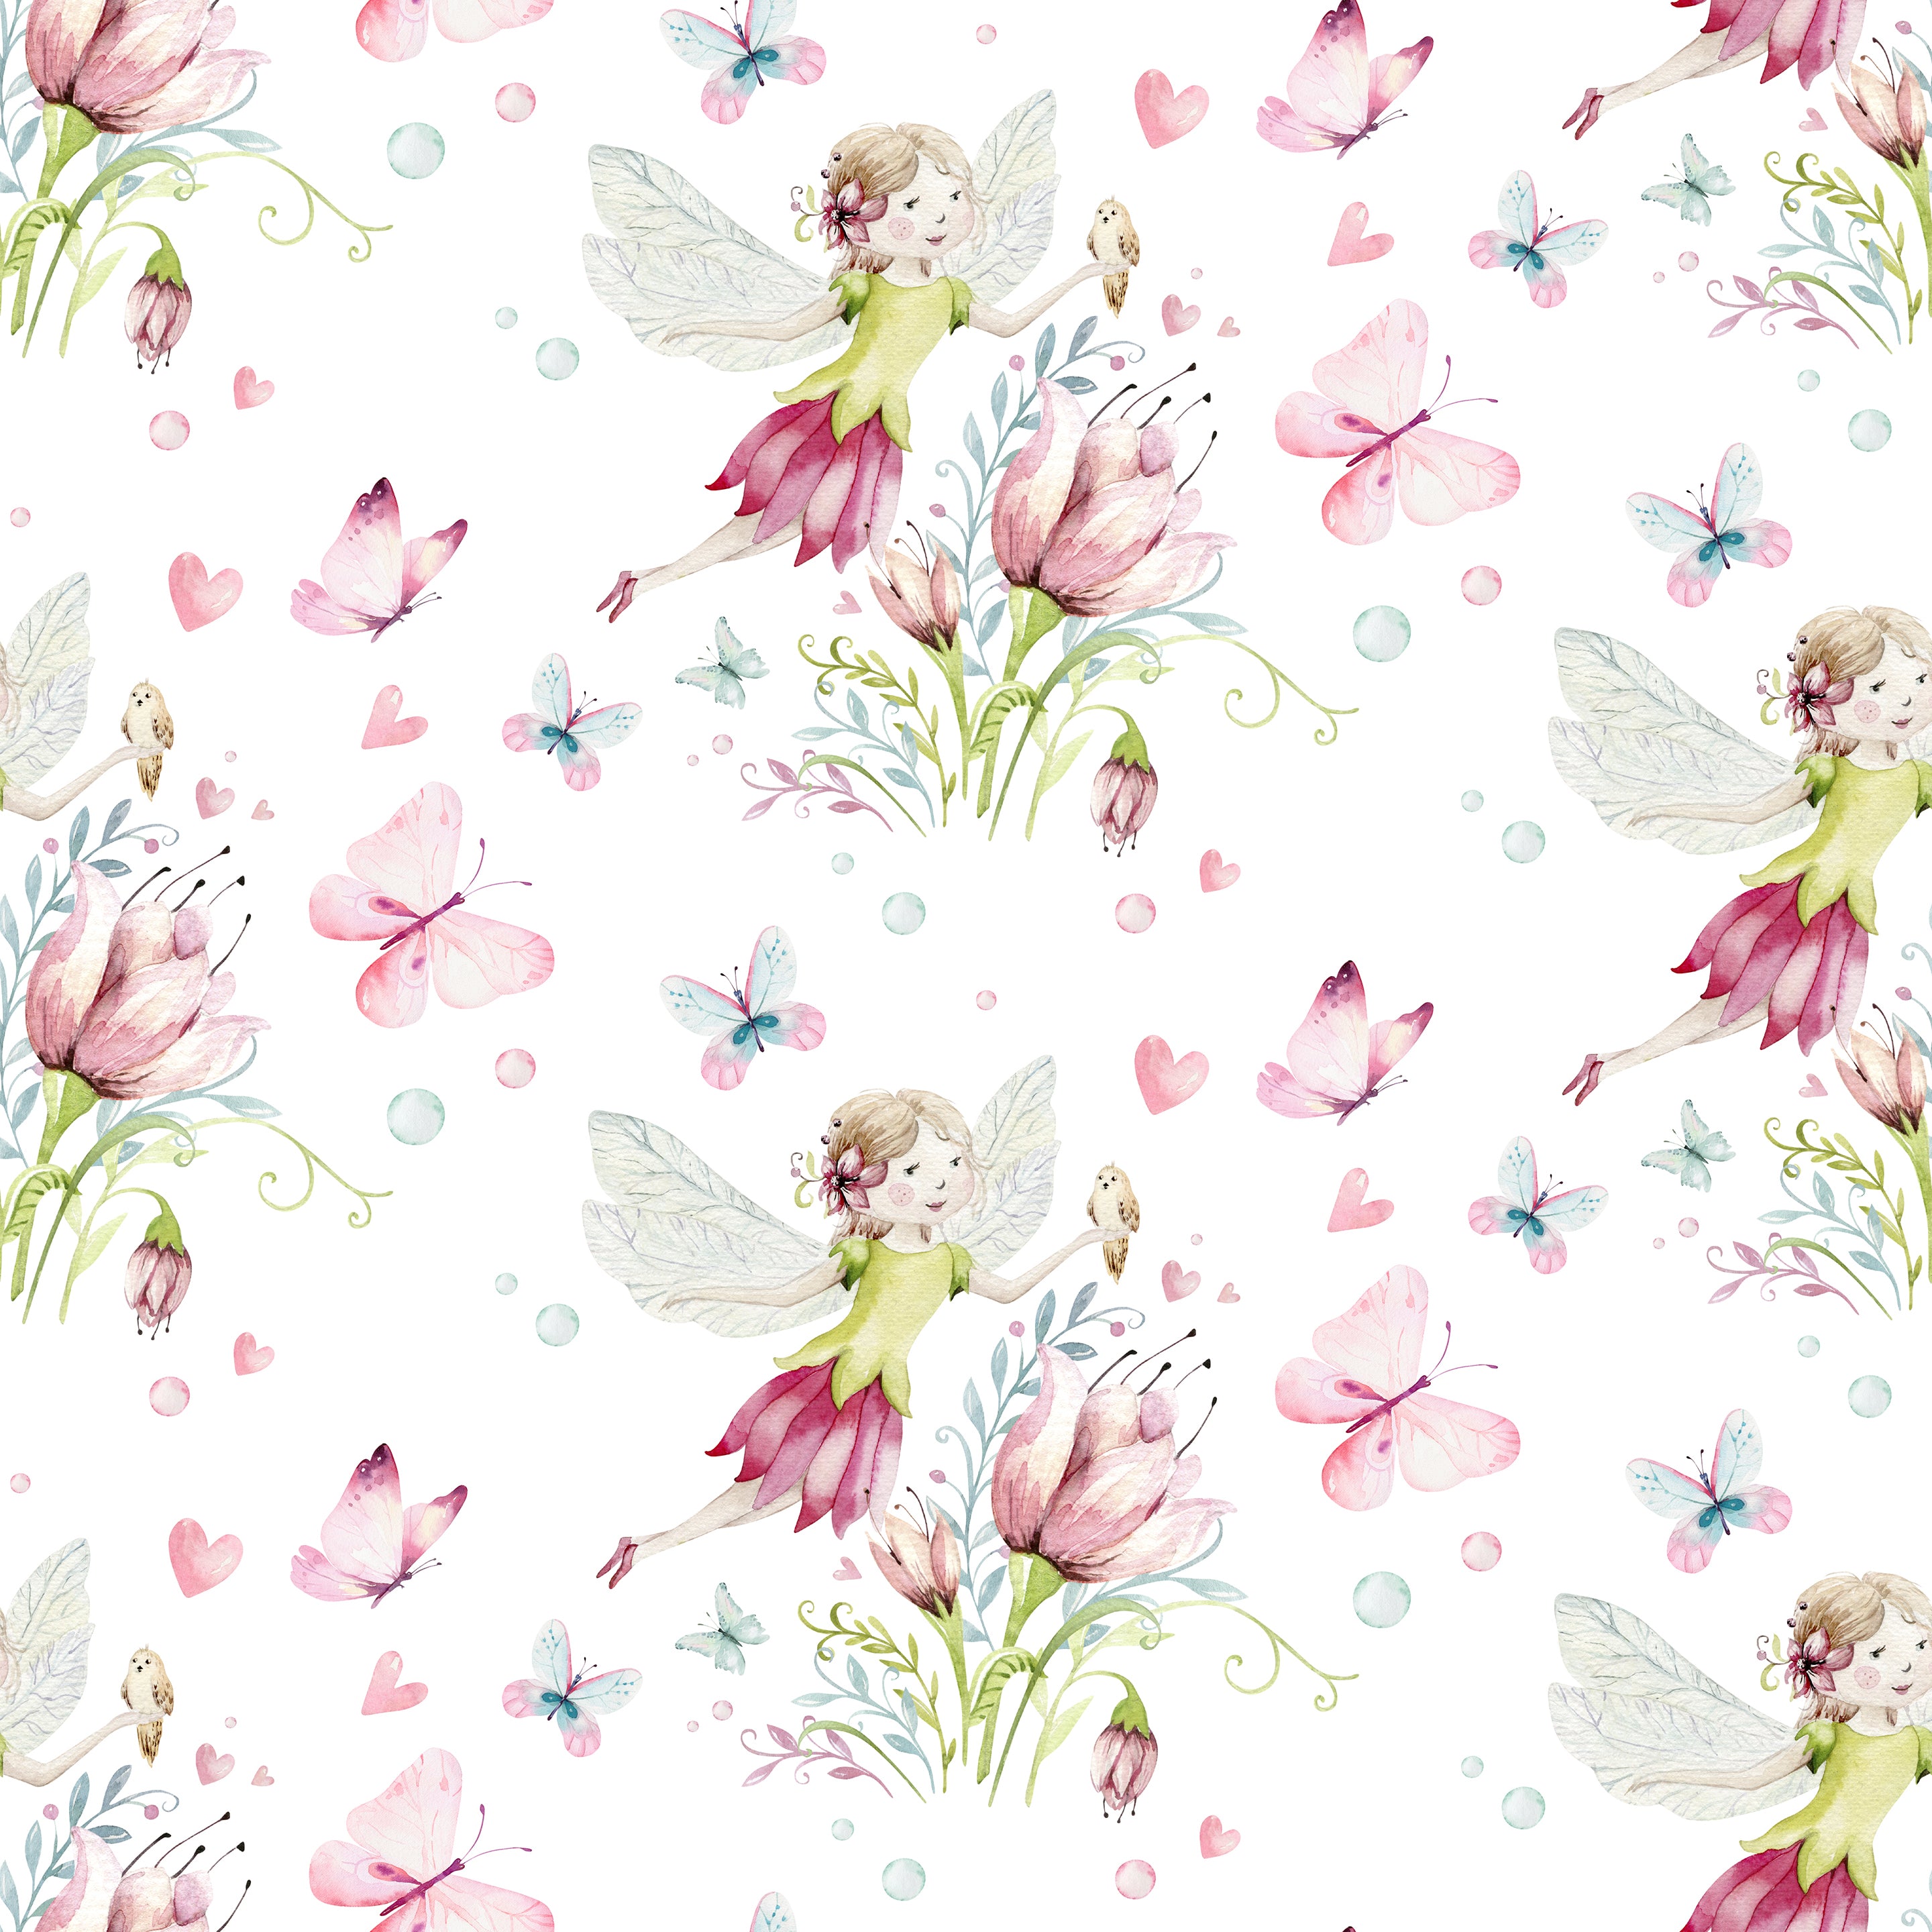 A whimsical and detailed view of the 'Fairy and Flowers Wallpaper,' featuring delicate fairies in flowing dresses with butterfly wings, surrounded by lush tulips and fluttering butterflies in shades of pink and teal. The fairies are depicted in a joyful pose with a backdrop of soft hearts and green foliage, set against a light white background.